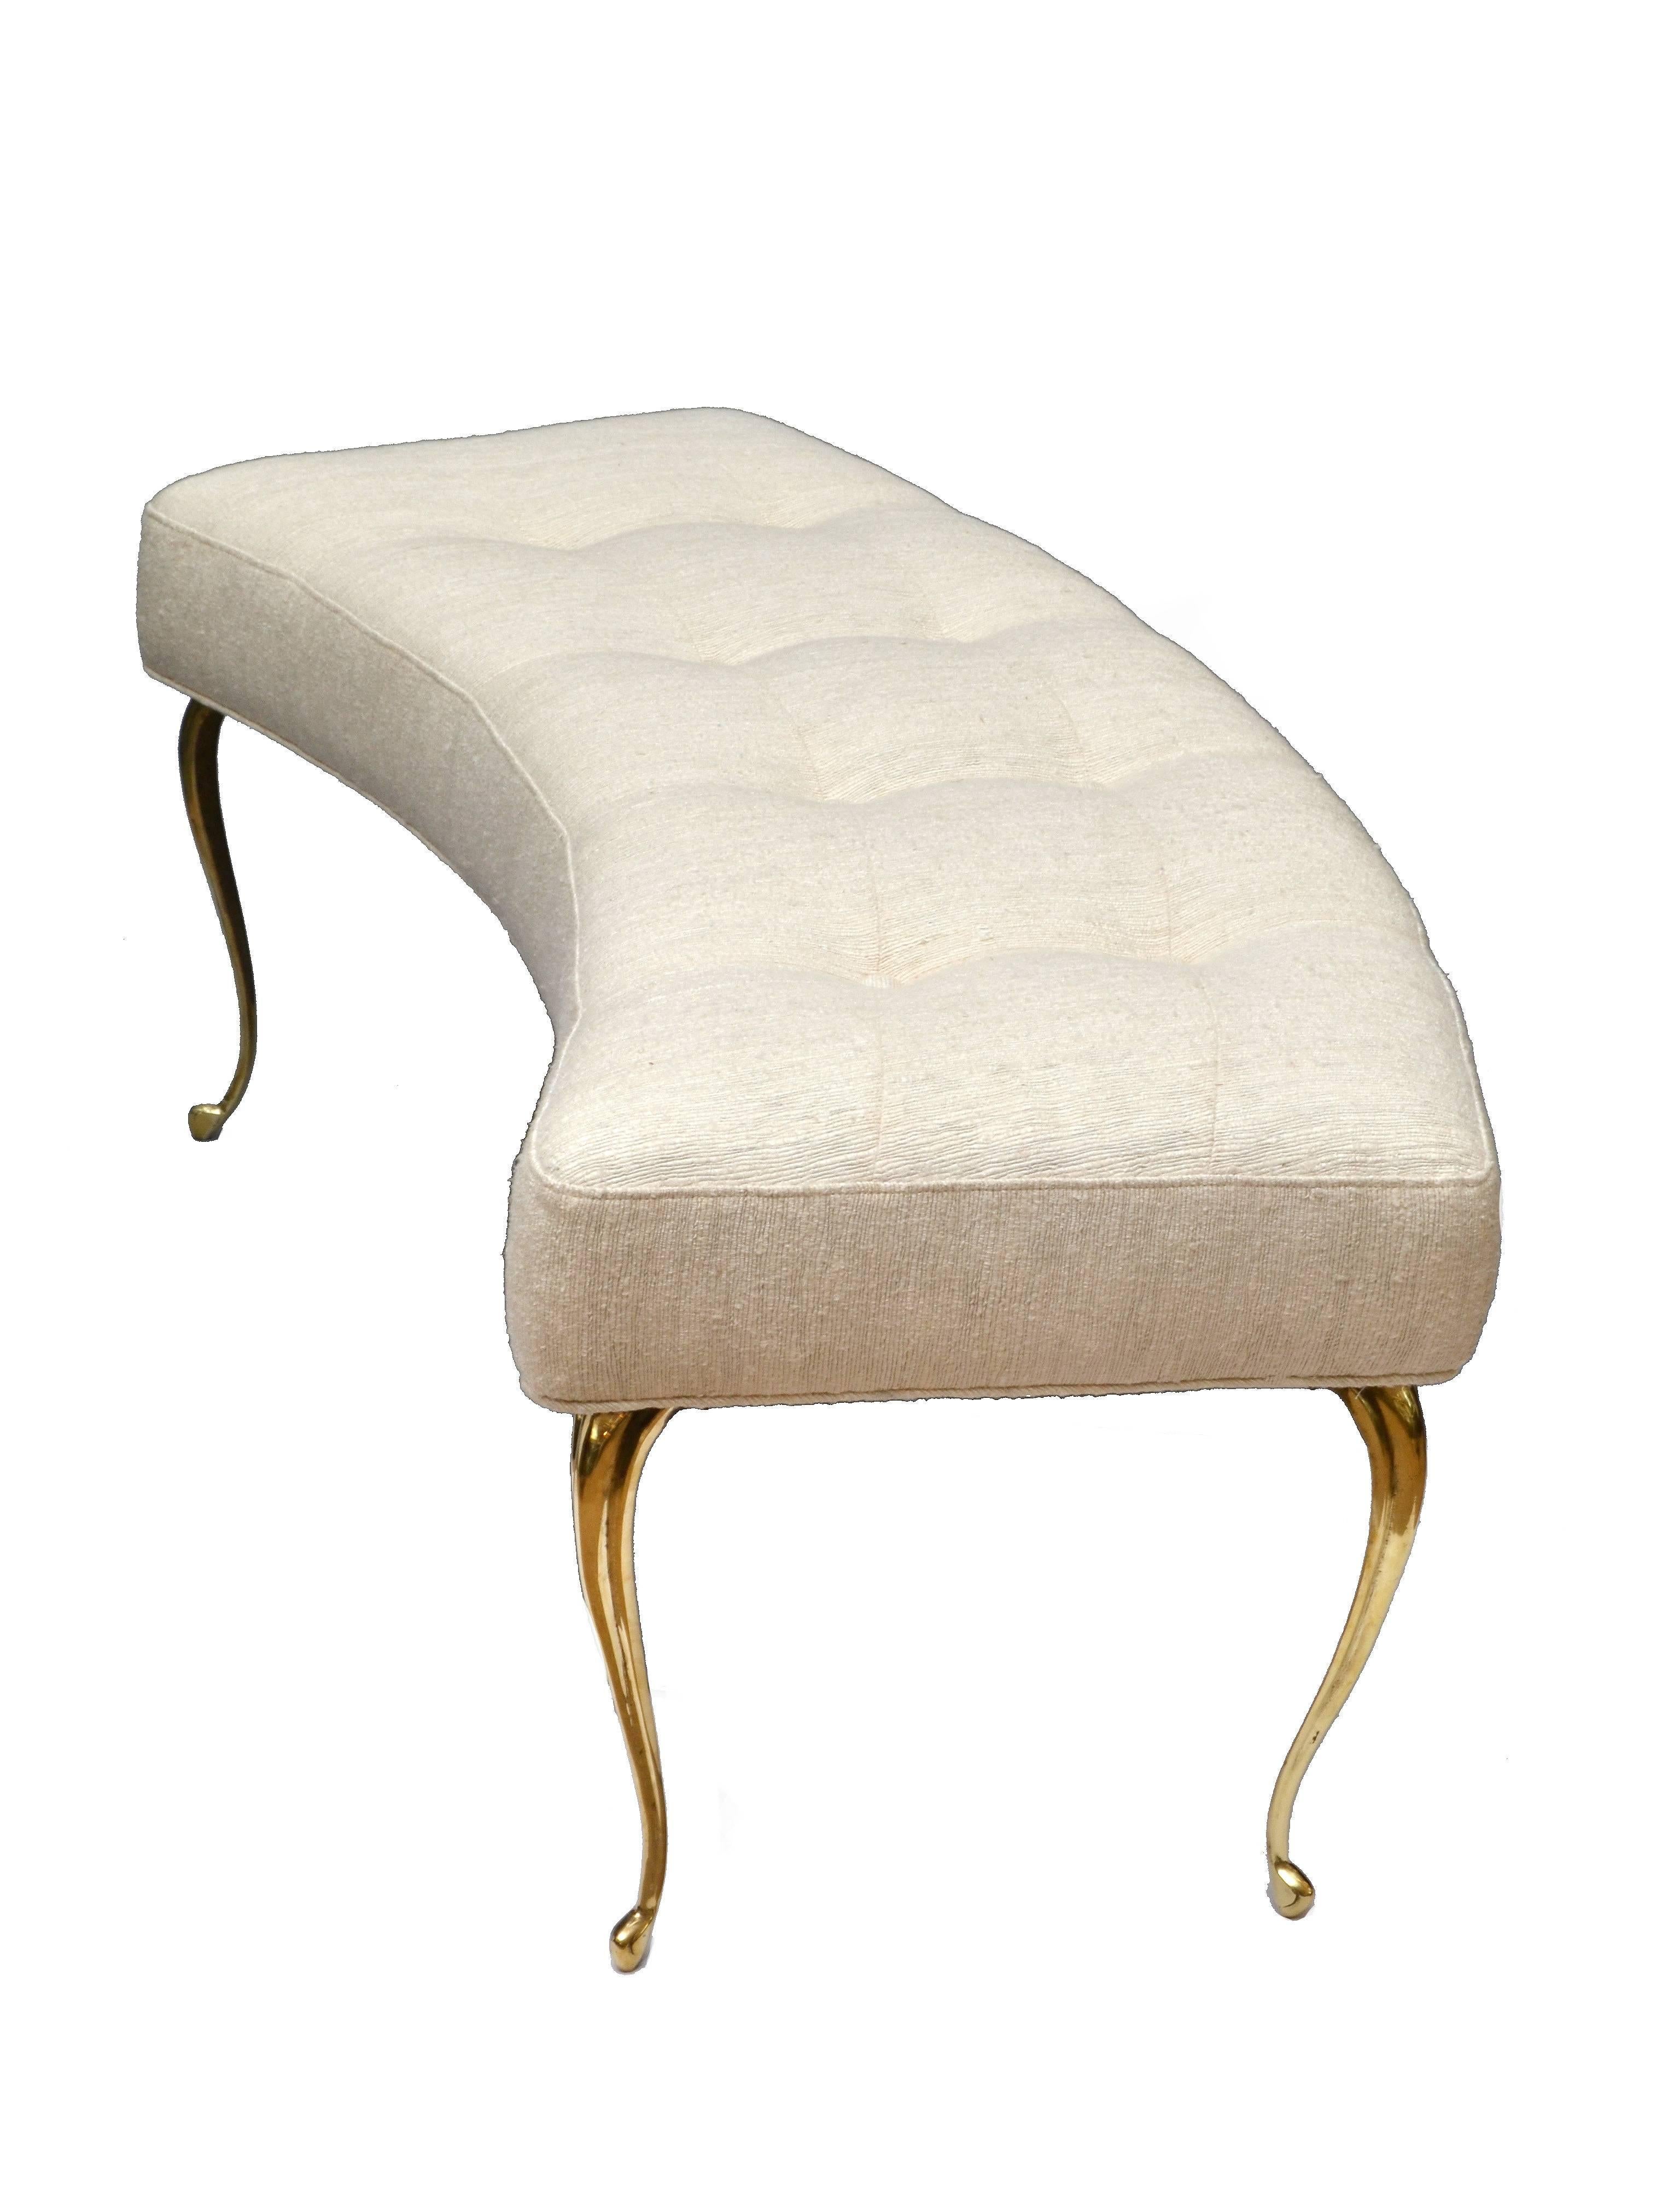 Hollywood Regency Italian Curved Bench with Brass Legs